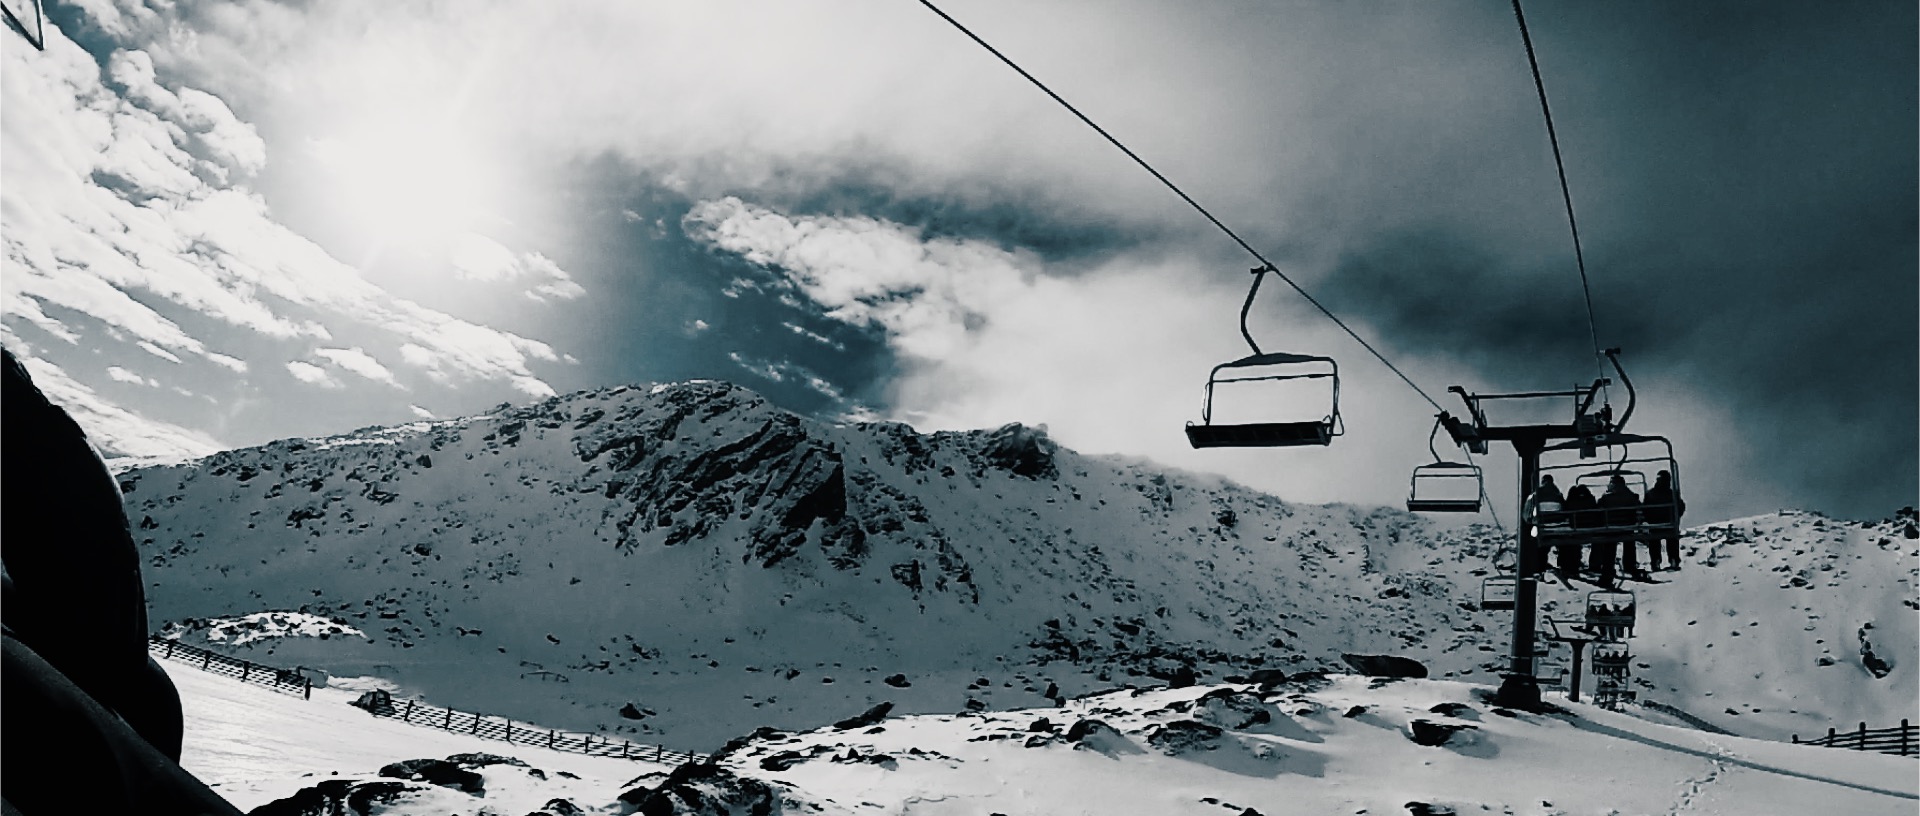 to those who dream episode one – the remarkables (Queenstown new zealand)